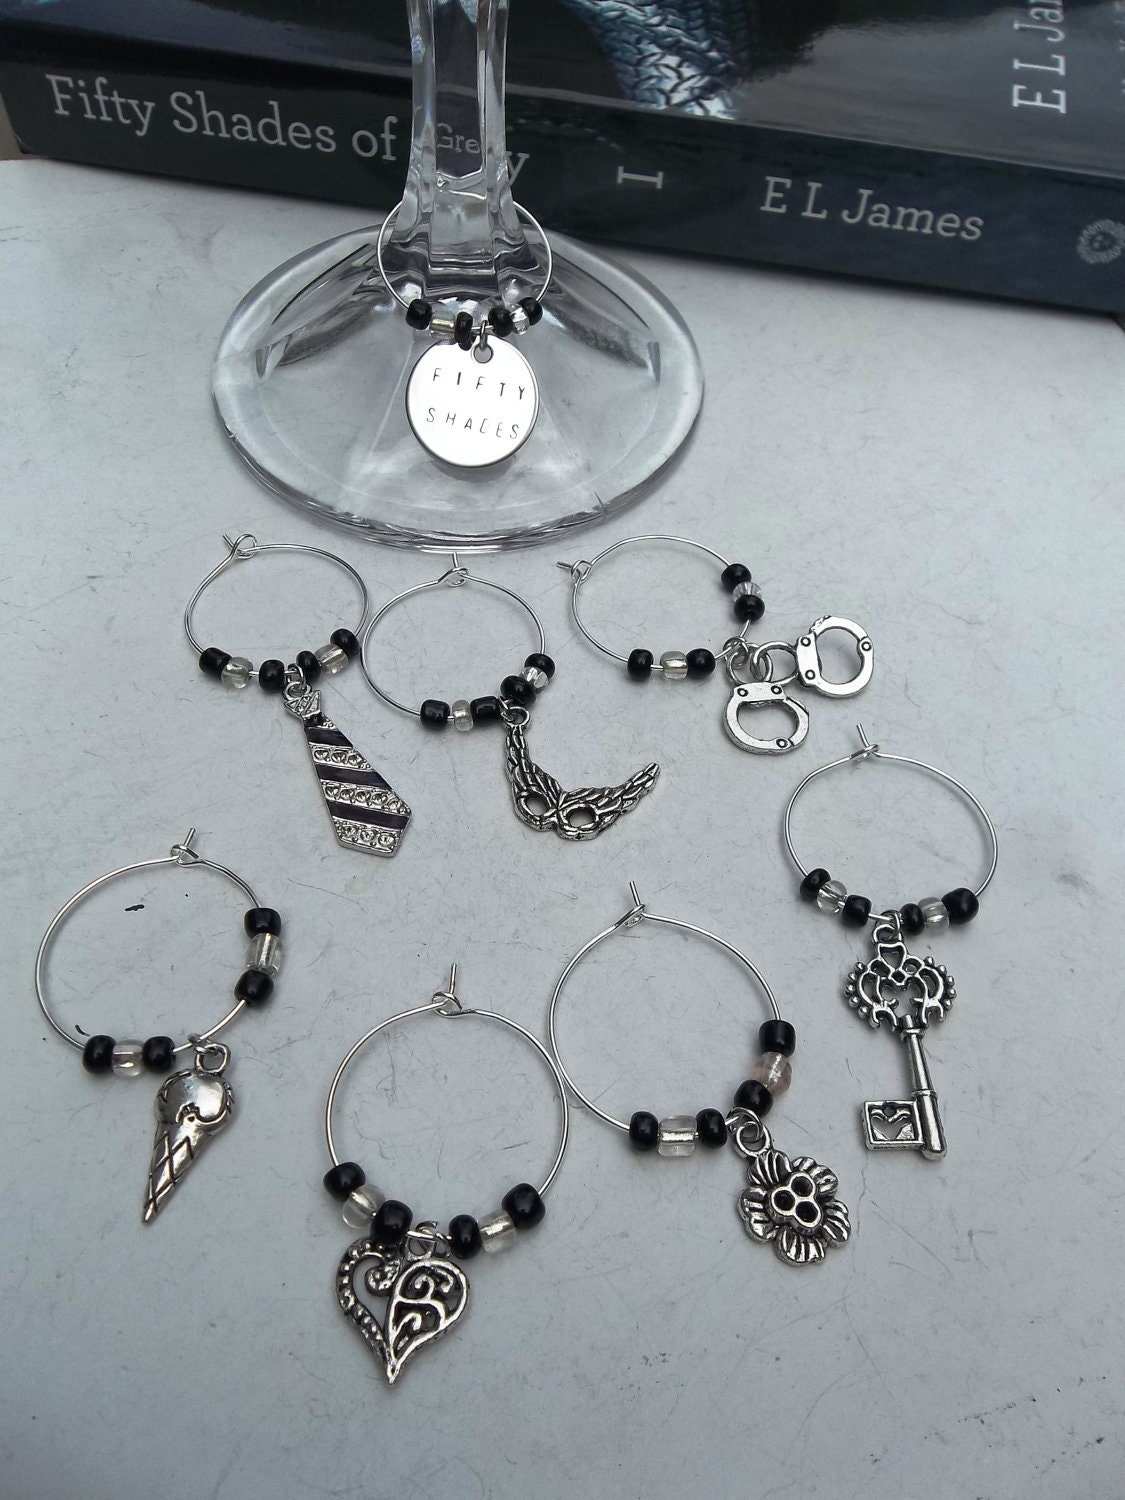 Fifty Shades of Grey Wine Glass Charms Set of 8 Hand-Stamped w/Silver Charms Inspired by the books 50 Shades